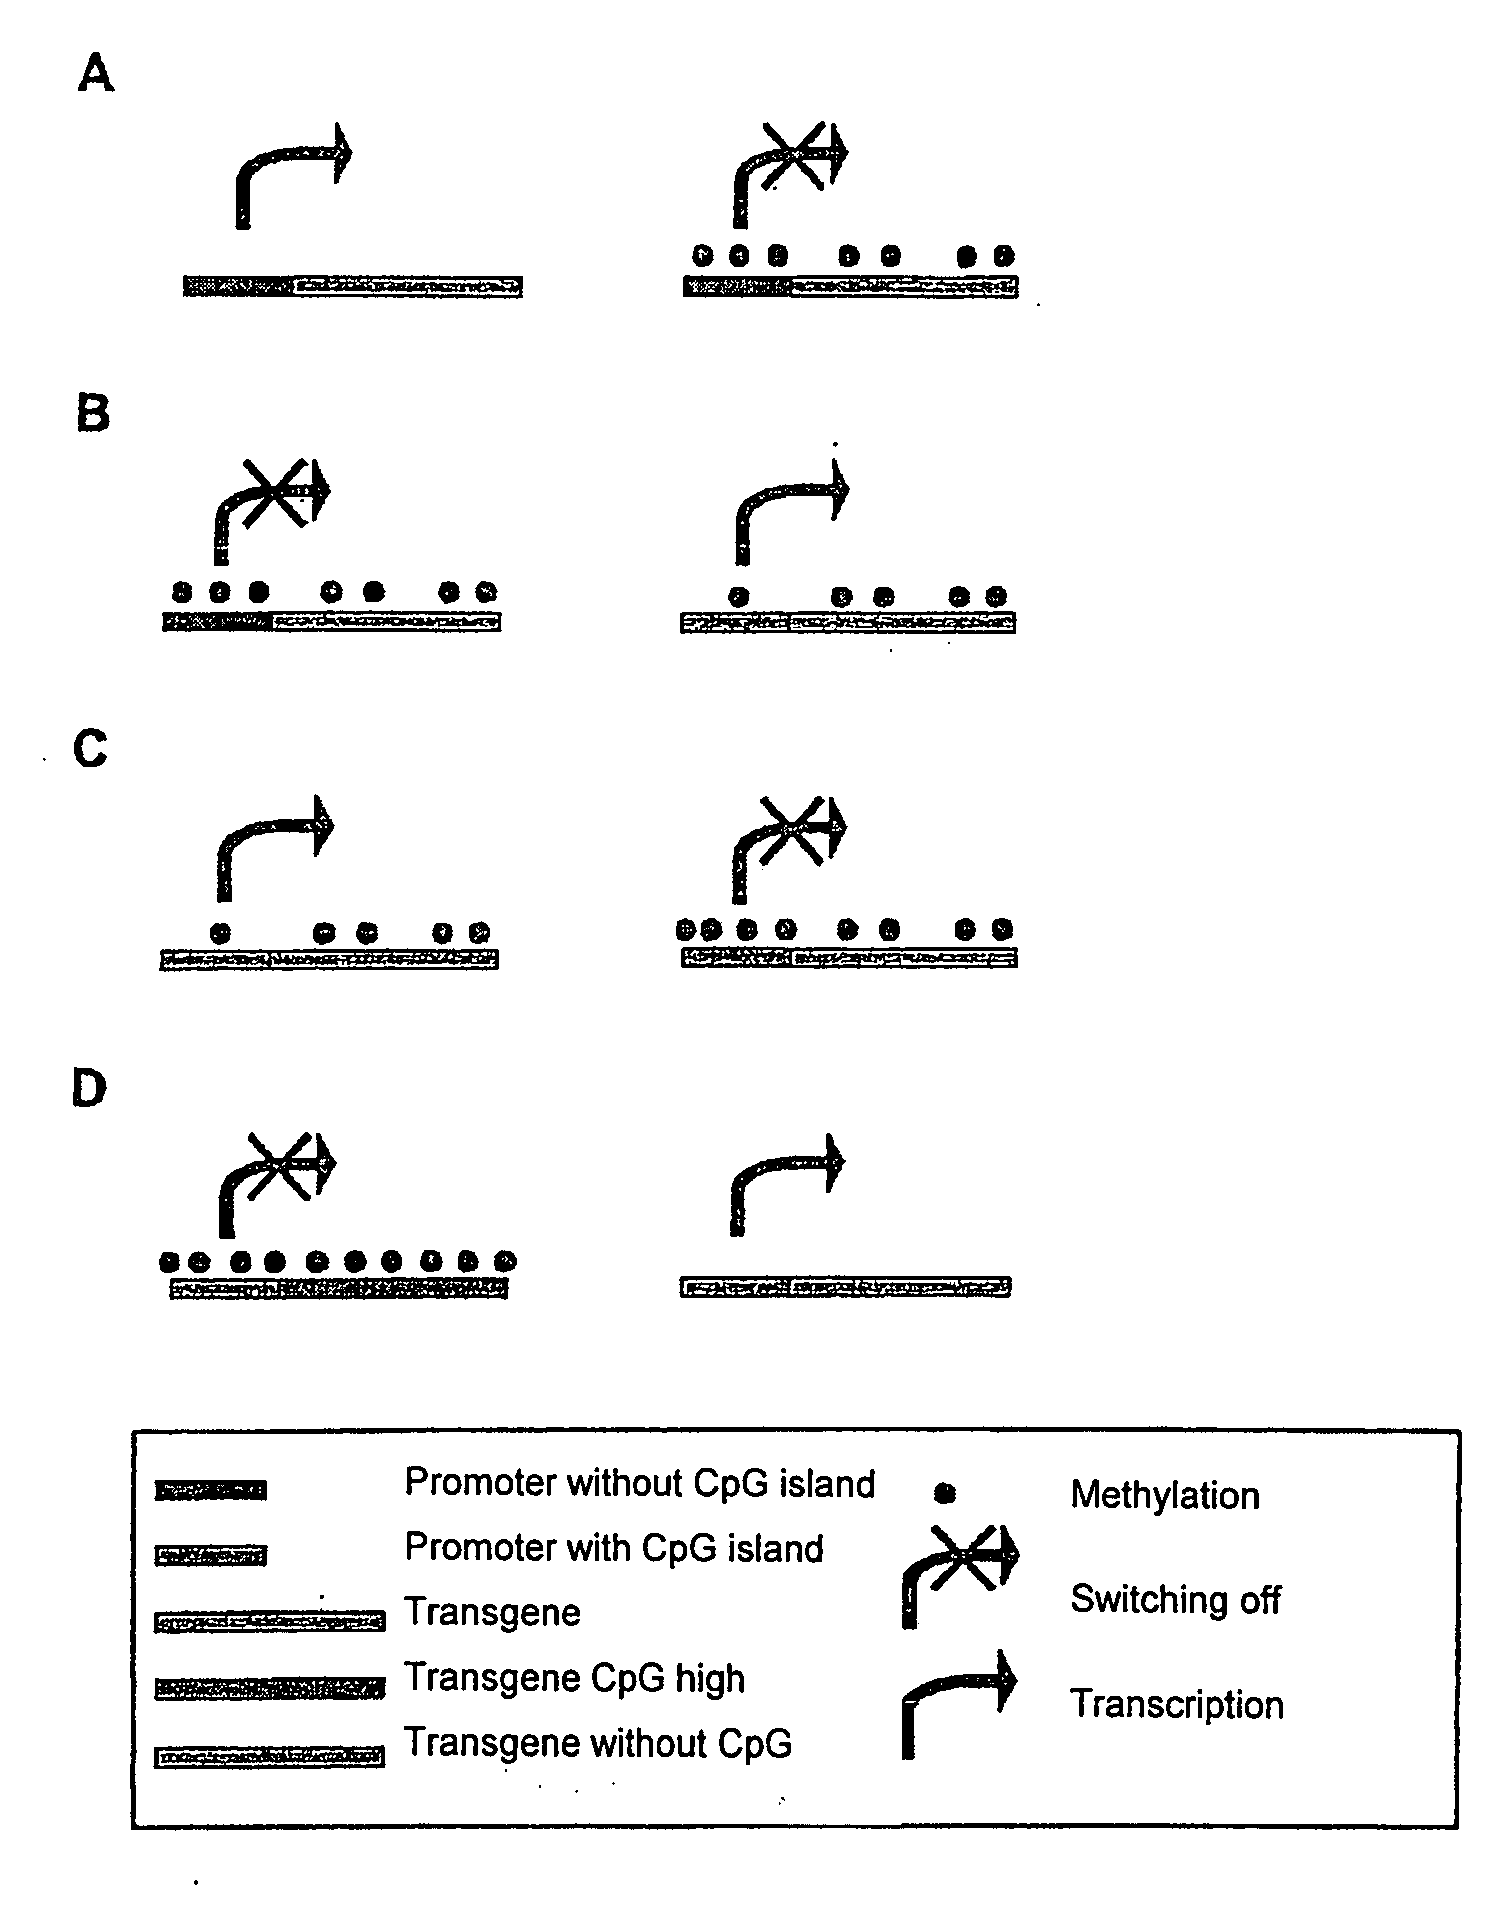 Method for modulating gene expression by modifying the cpg content